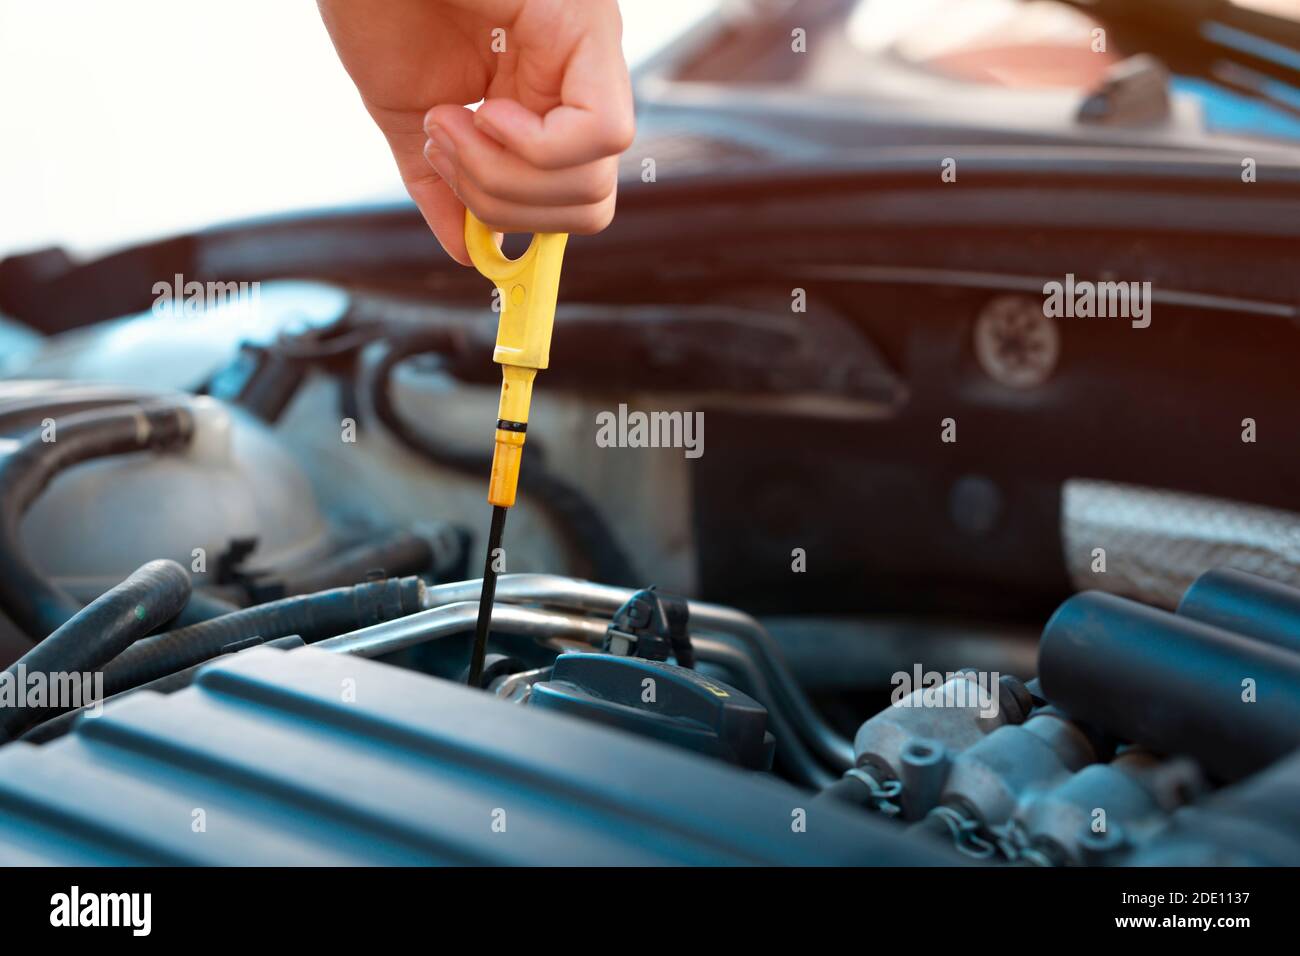 to check car engine oil, using engine oil check stick Stock Photo